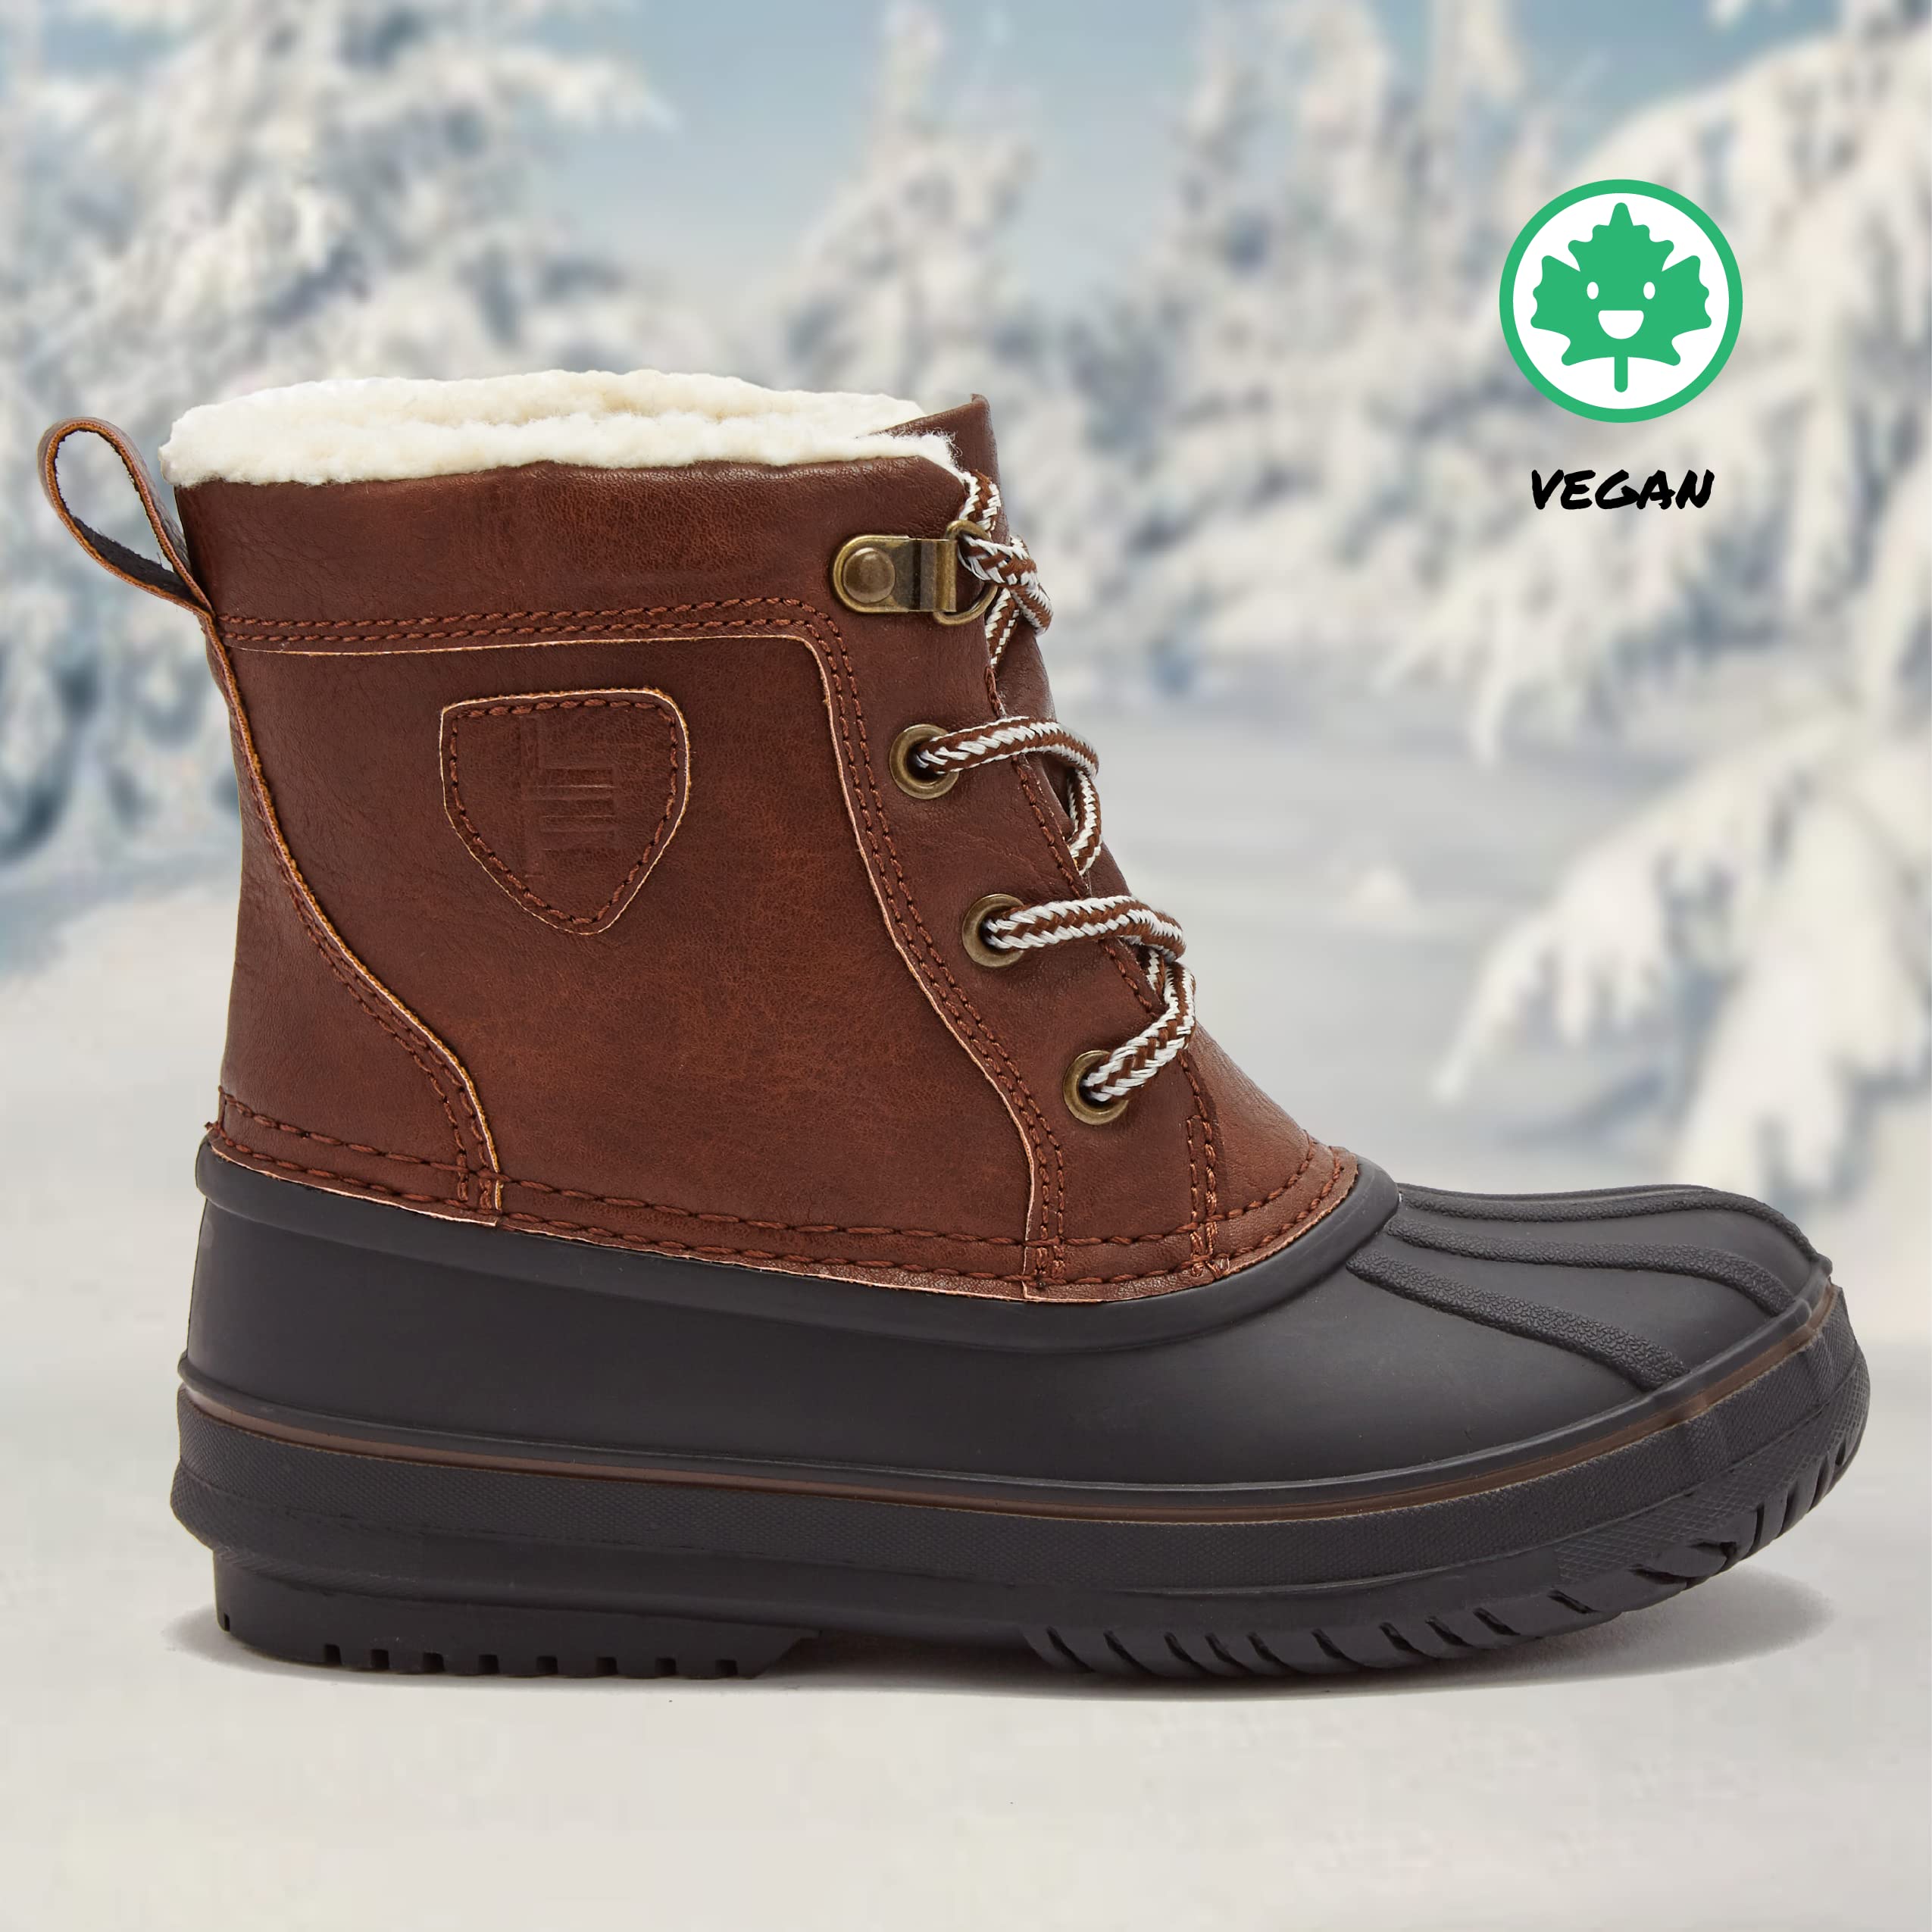 LONDON FOG Warrington Snow Boots for Kids - Insulated Winter Snow Duck Boots for Boys and Girls - Little Kid and Big Kid Sizes 11 to 7